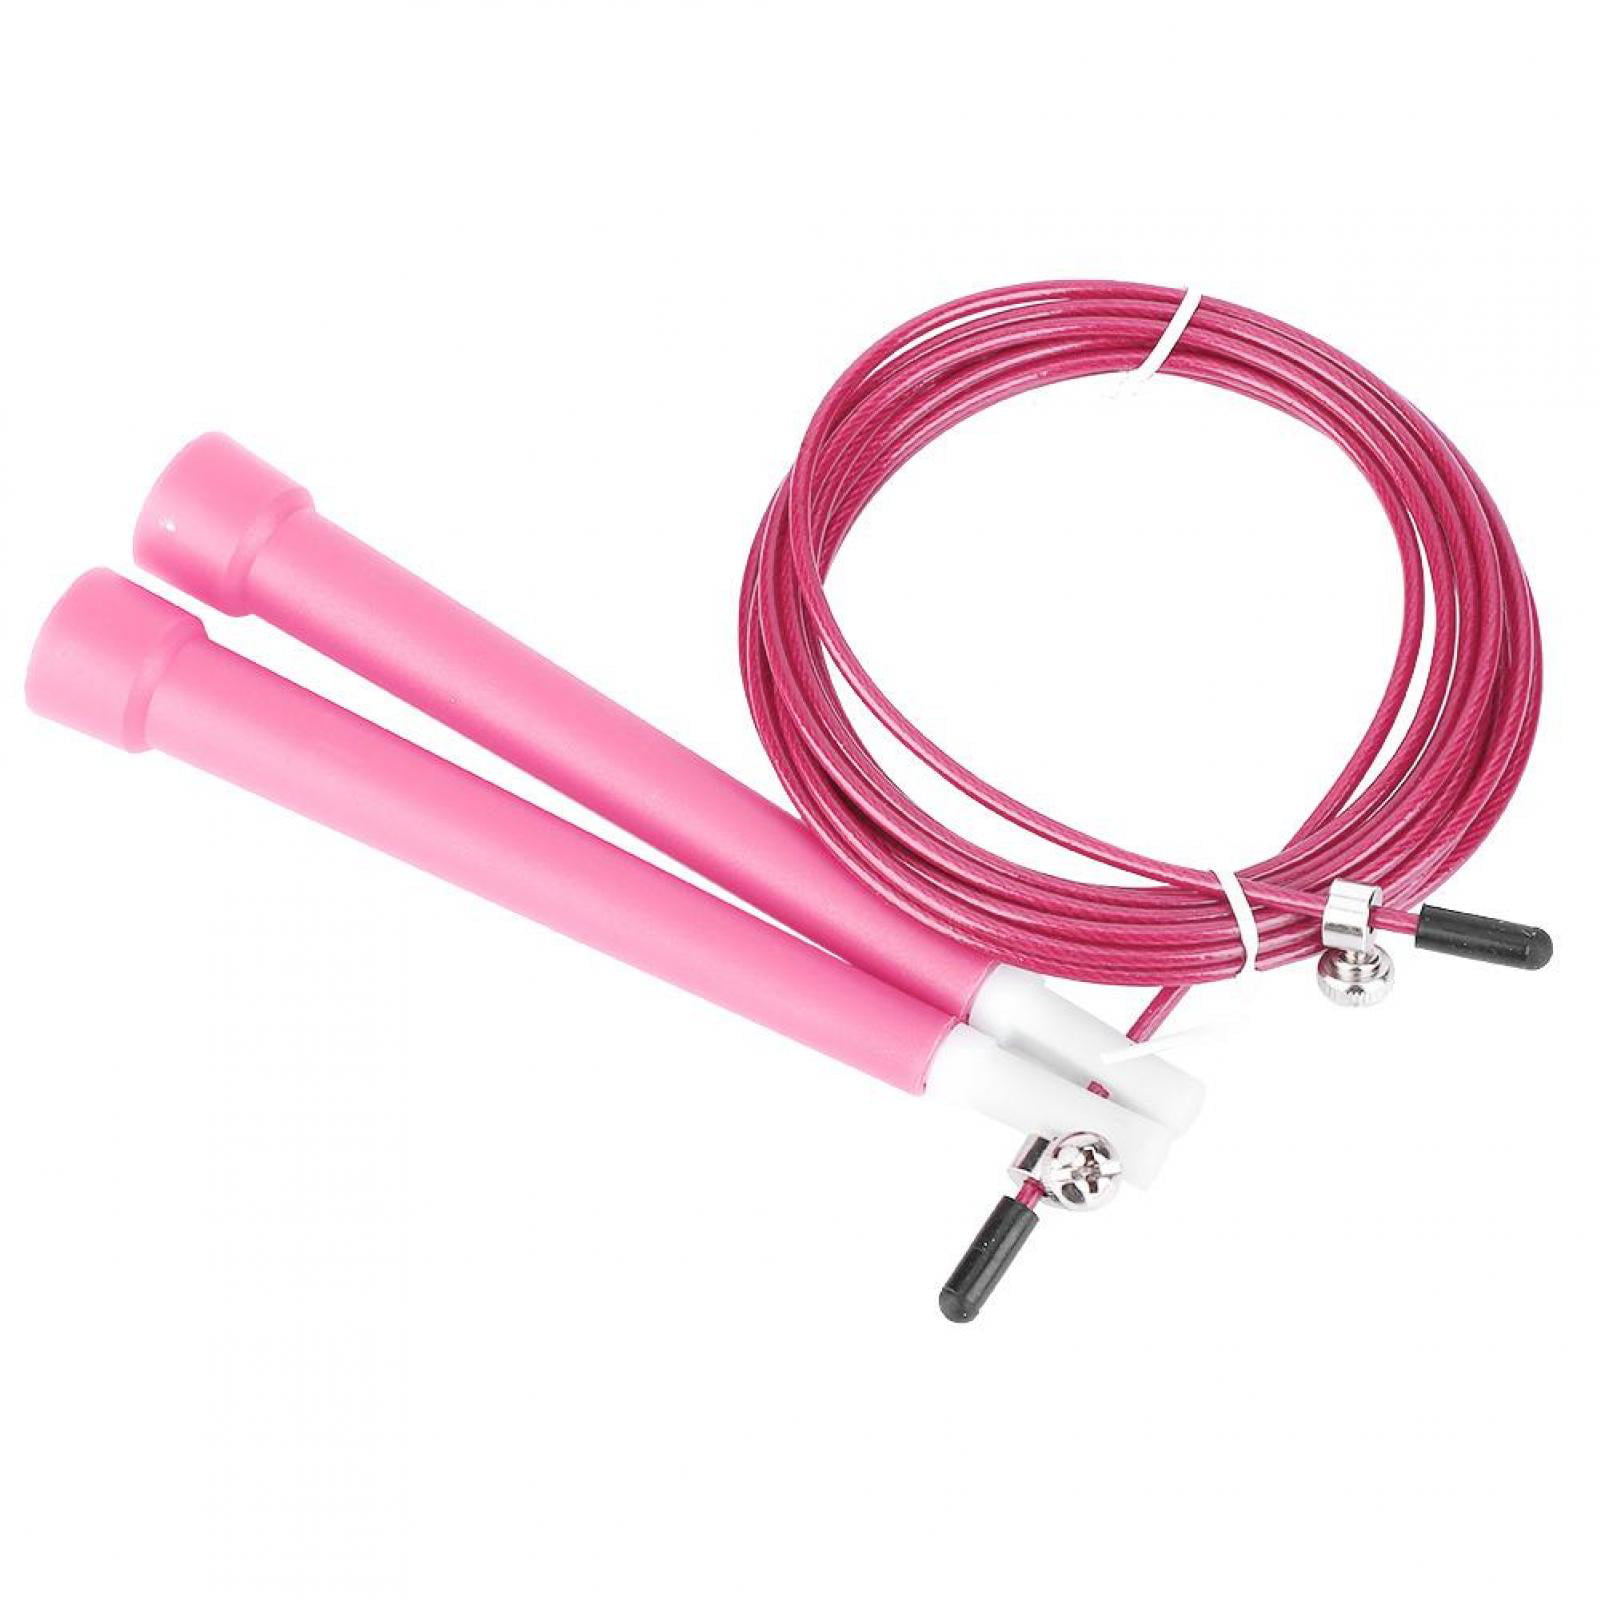 Super Rope Steel Jump Rope Wire Skipping Fitness Exercise Gym Crossfit 